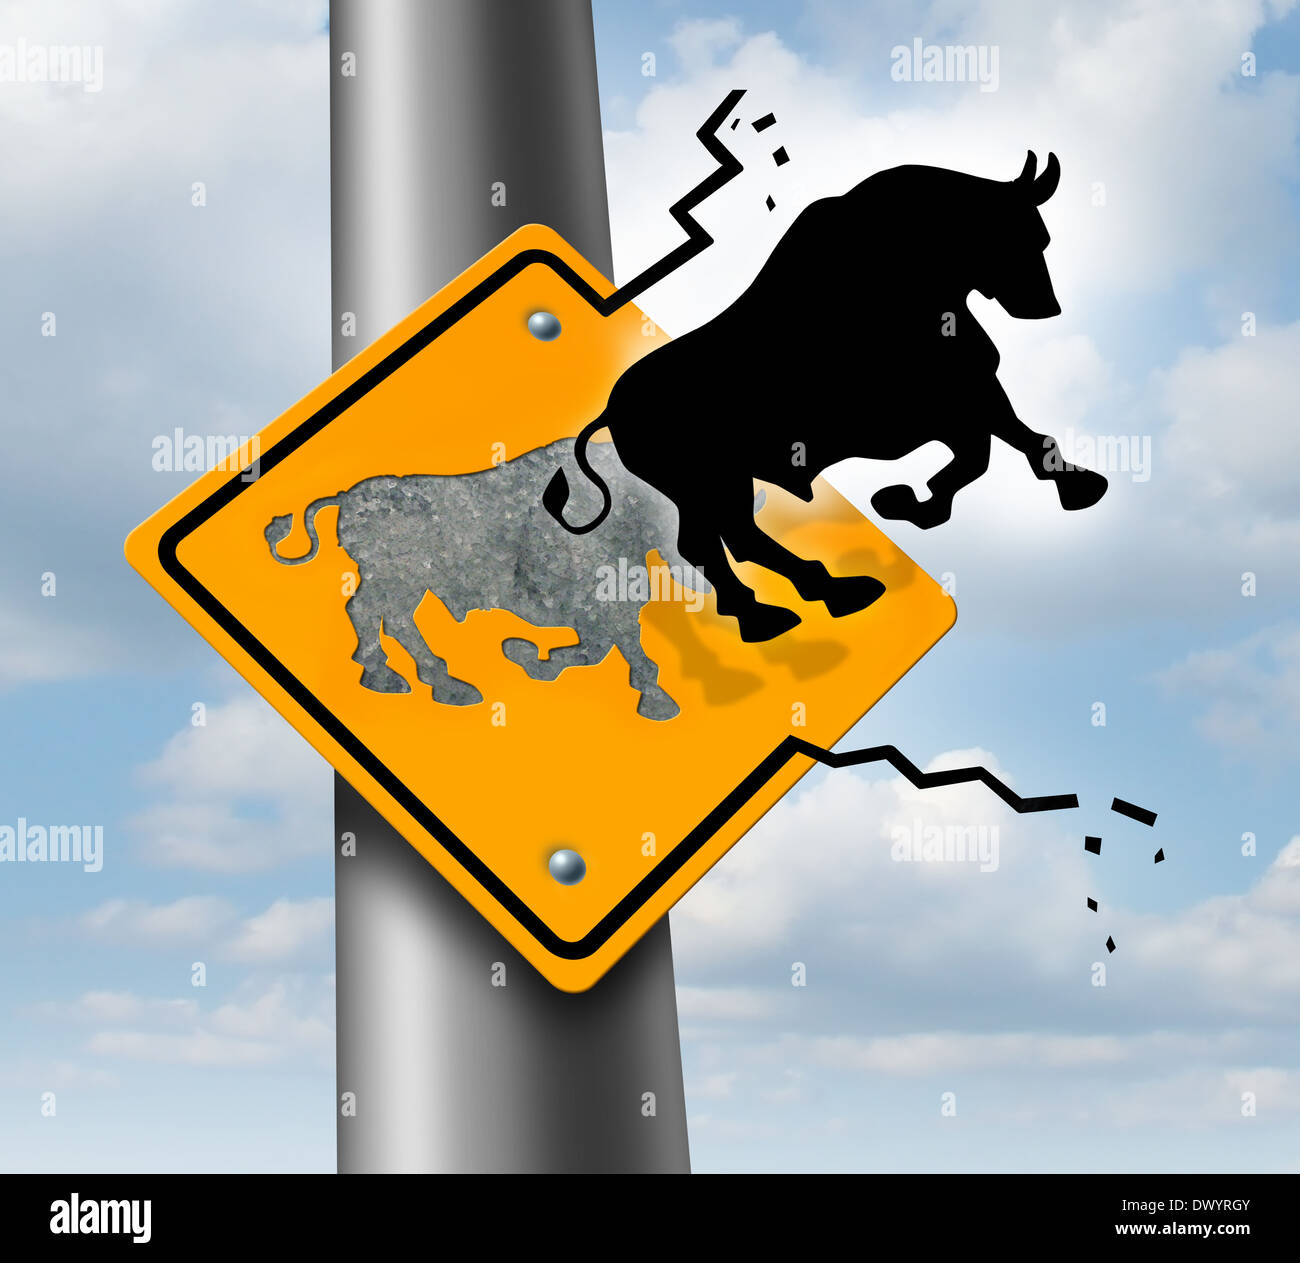 Bull market rise business and finance concept for wealth growth as a yellow traffic sign with a bull icon breaking out of the metal and escaping to higher levels of economic success and profitability. Stock Photo